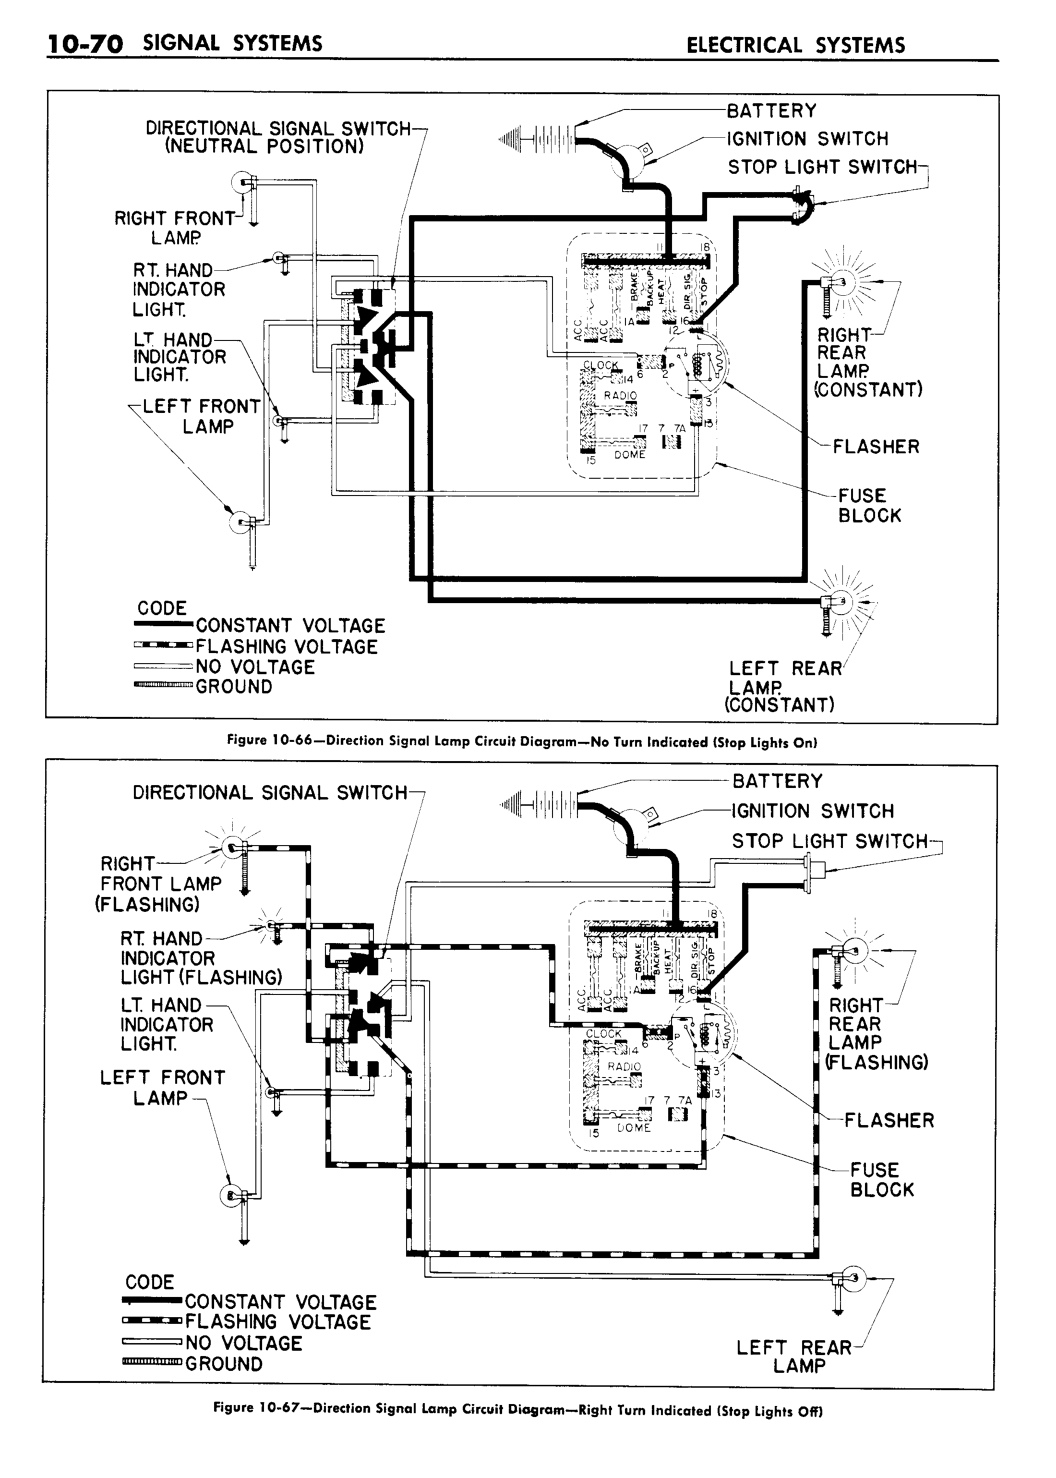 n_11 1957 Buick Shop Manual - Electrical Systems-070-070.jpg